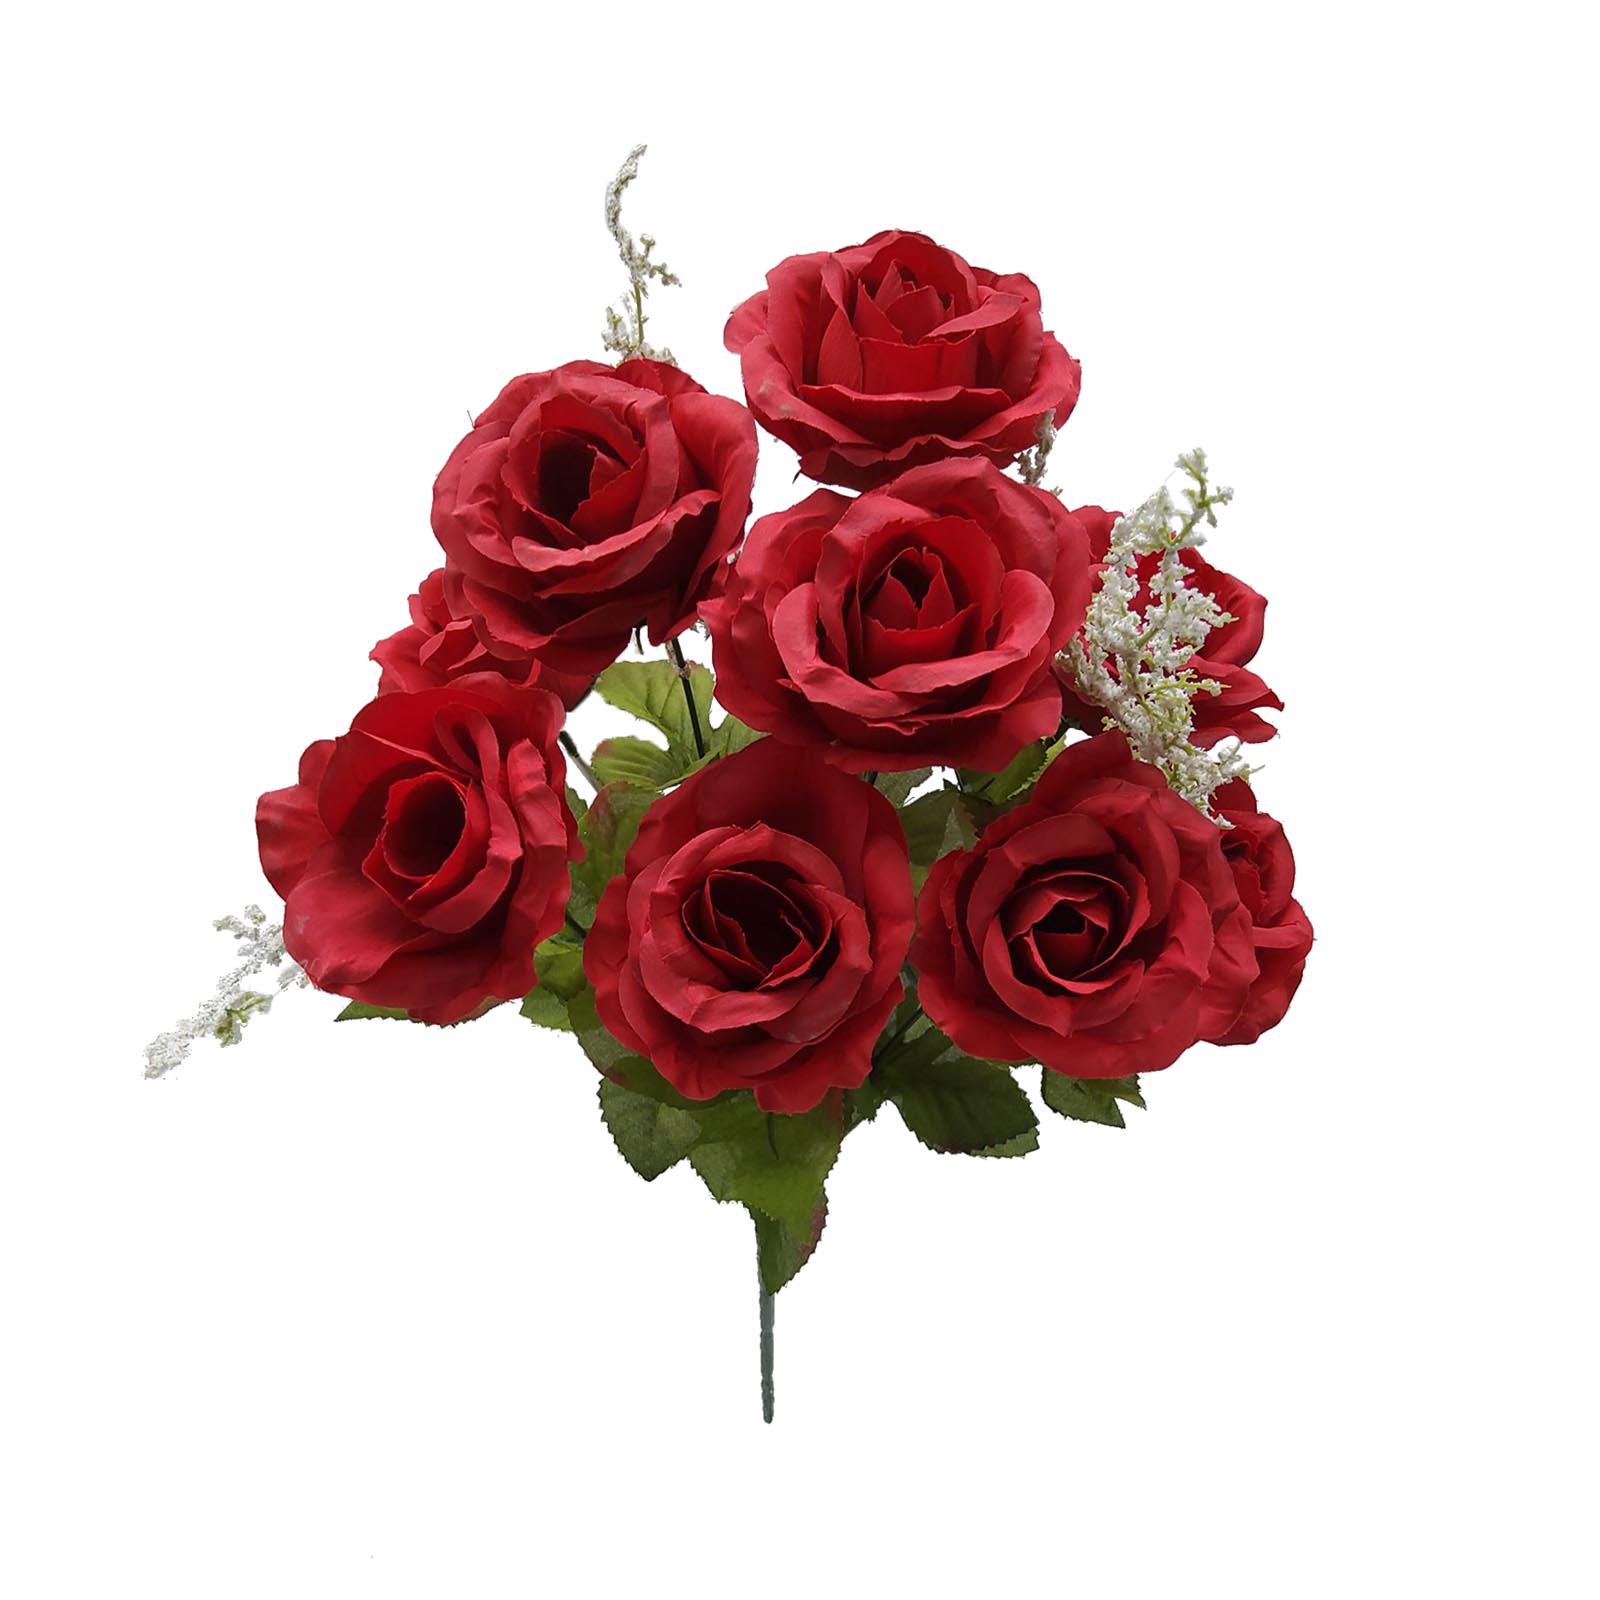 Mainstays Indoor Artificial Rose Bush, Red Color, Assembled Height 17.5" - image 1 of 5